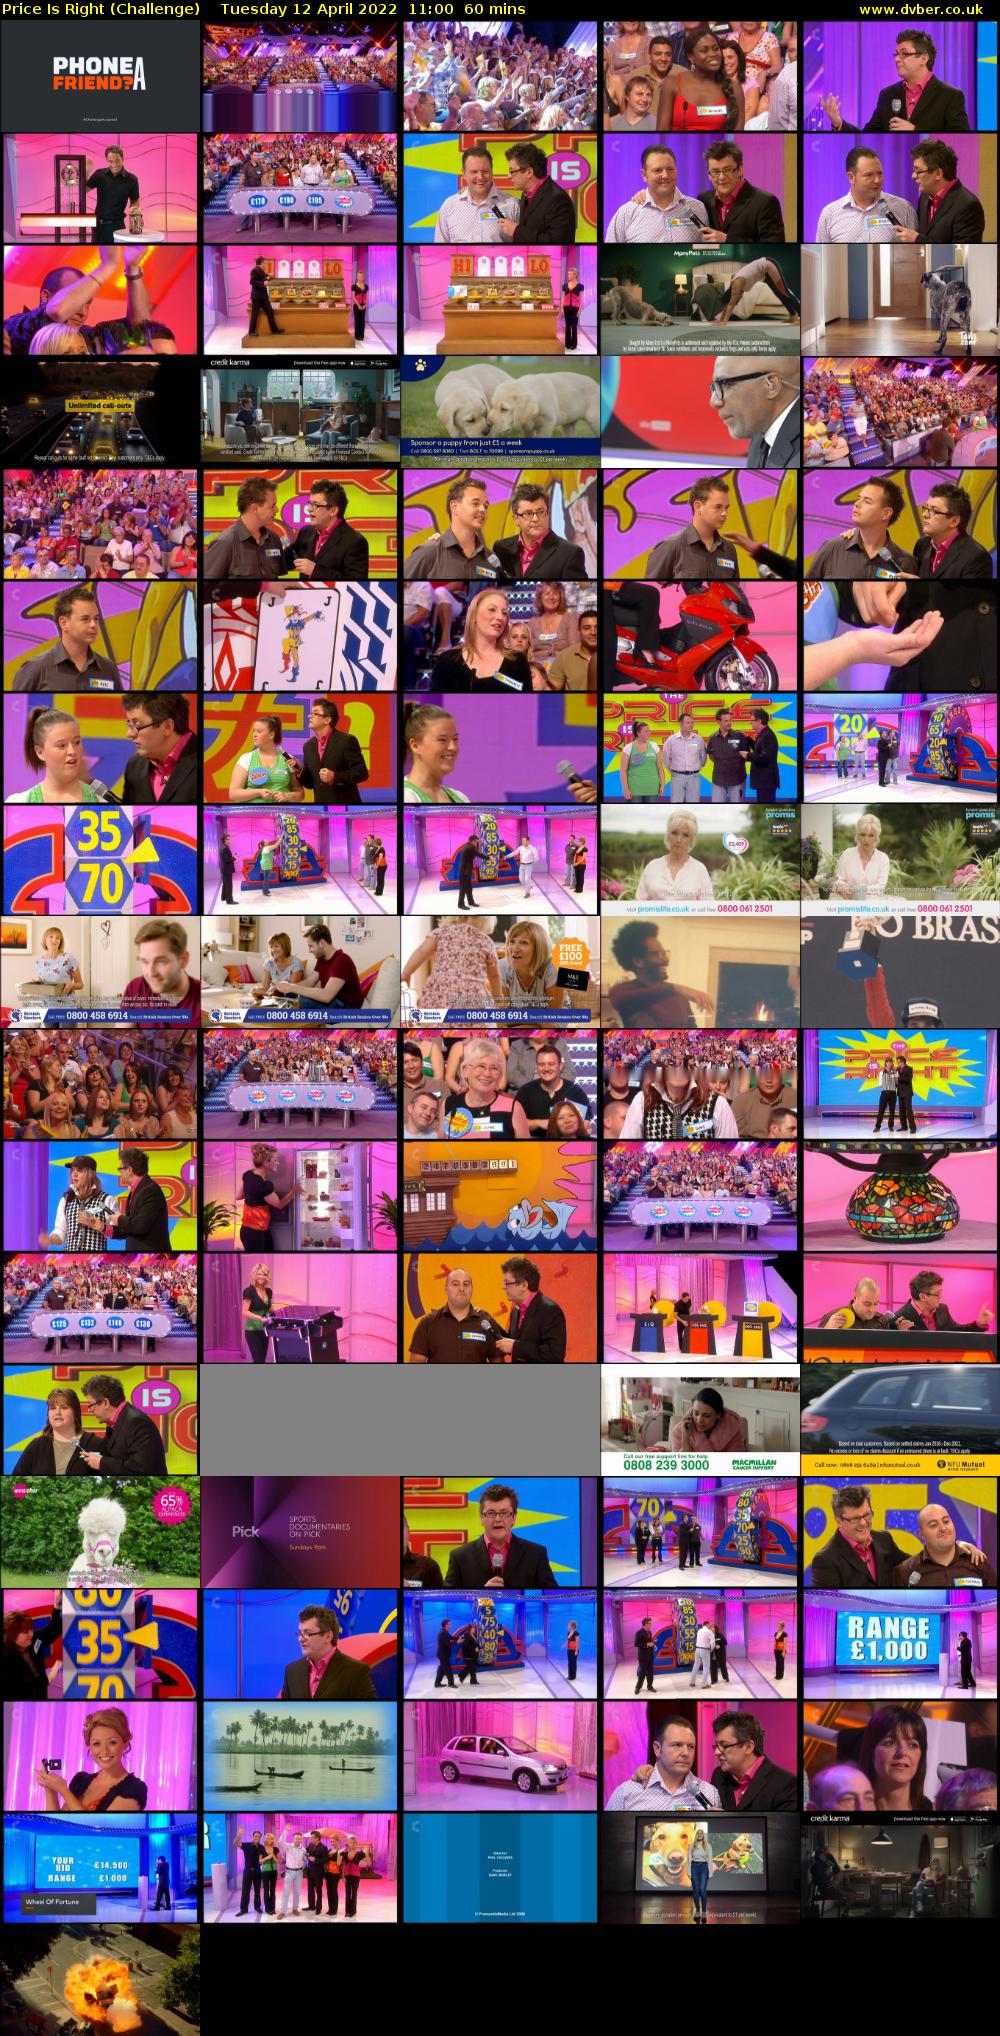 Price Is Right (Challenge) Tuesday 12 April 2022 11:00 - 12:00